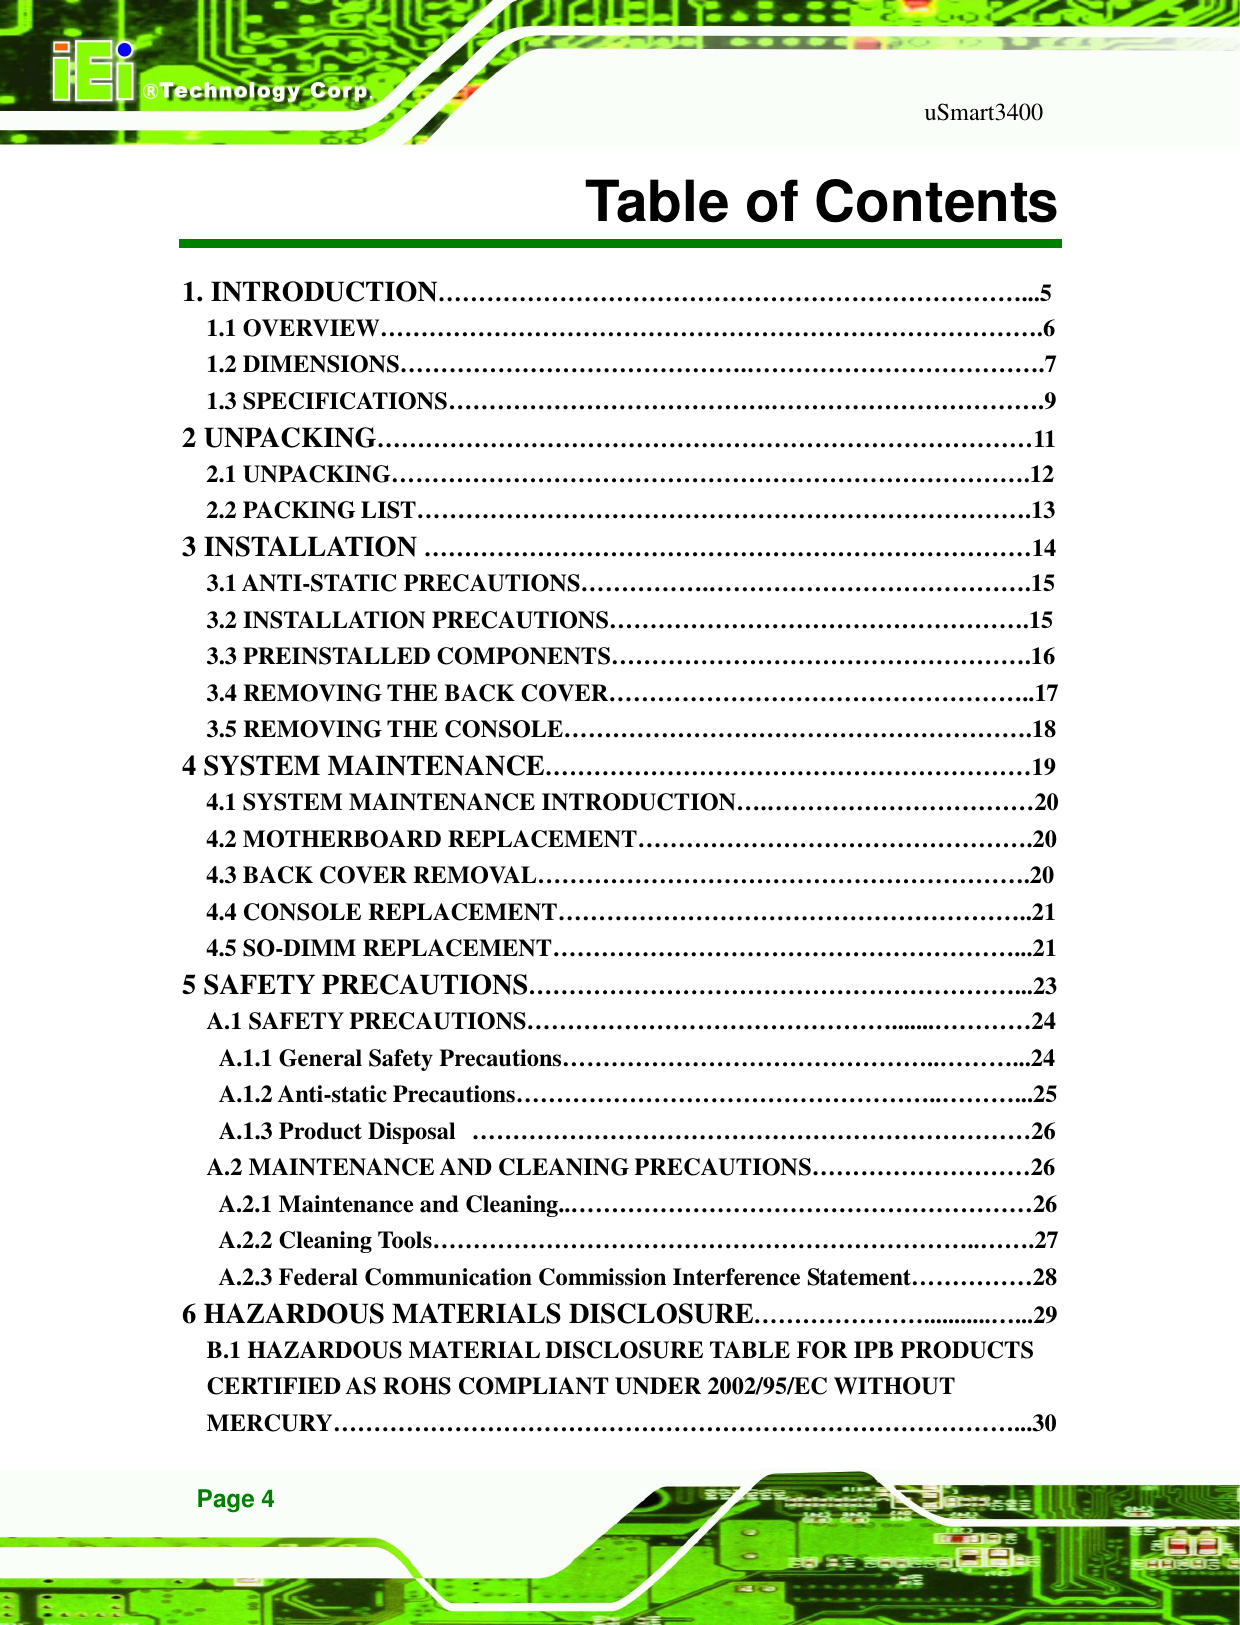   uSmart3400 Page 4 Table of Contents 1. INTRODUCTION………………………………………………………………...5 1.1 OVERVIEW……………………………………………………………………….6 1.2 DIMENSIONS…………………………………….……………………………….7 1.3 SPECIFICATIONS………………………………….…………………………….9 2 UNPACKING………………………………………………………………………11 2.1 UNPACKING…………………………………………………………………….12 2.2 PACKING LIST………………………………………………………………….13 3 INSTALLATION …………………………………………………………………14 3.1 ANTI-STATIC PRECAUTIONS…………….………………………………….15 3.2 INSTALLATION PRECAUTIONS…………………………………………….15 3.3 PREINSTALLED COMPONENTS…………………………………………….16 3.4 REMOVING THE BACK COVER……………………………………………..17 3.5 REMOVING THE CONSOLE………………………………………………….18 4 SYSTEM MAINTENANCE……………………………………………………19 4.1 SYSTEM MAINTENANCE INTRODUCTION….……………………………20 4.2 MOTHERBOARD REPLACEMENT………………………………………….20 4.3 BACK COVER REMOVAL…………………………………………………….20 4.4 CONSOLE REPLACEMENT…………………………………………………..21 4.5 SO-DIMM REPLACEMENT…………………………………………………...21 5 SAFETY PRECAUTIONS……………………………………………………...23 A.1 SAFETY PRECAUTIONS……………………………………….......…………24 A.1.1 General Safety Precautions………………………………………..………...24 A.1.2 Anti-static Precautions……………………………………………..………...25 A.1.3 Product Disposal  ……………………………………………………………26 A.2 MAINTENANCE AND CLEANING PRECAUTIONS………………………26 A.2.1 Maintenance and Cleaning..…………………………………………………26 A.2.2 Cleaning Tools…………………………………………………………..…….27 A.2.3 Federal Communication Commission Interference Statement……………28 6 HAZARDOUS MATERIALS DISCLOSURE…………………...........…...29 B.1 HAZARDOUS MATERIAL DISCLOSURE TABLE FOR IPB PRODUCTS CERTIFIED AS ROHS COMPLIANT UNDER 2002/95/EC WITHOUT MERCURY…………………………………………………………………………...30 